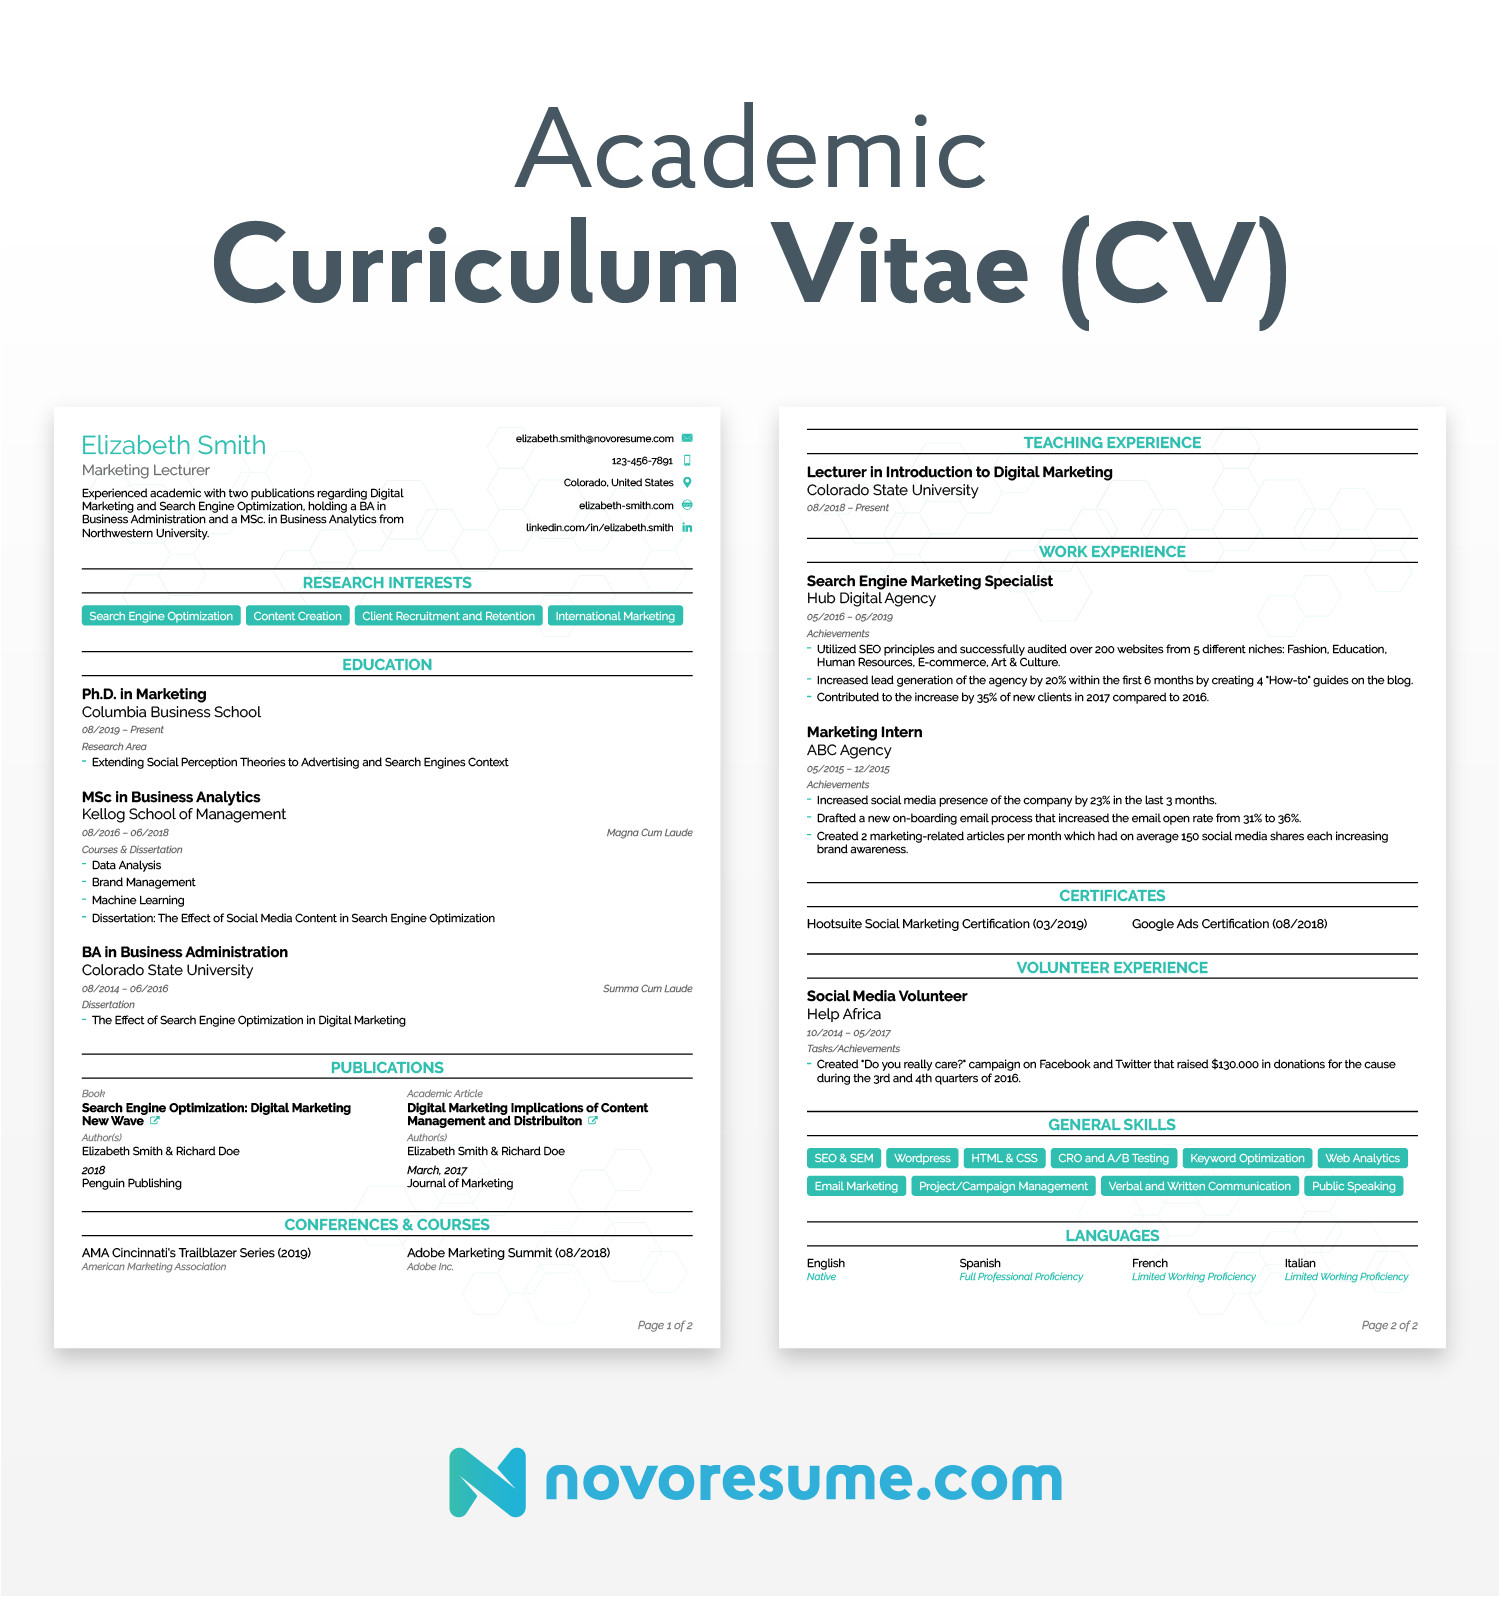 cv vs resume what is the difference